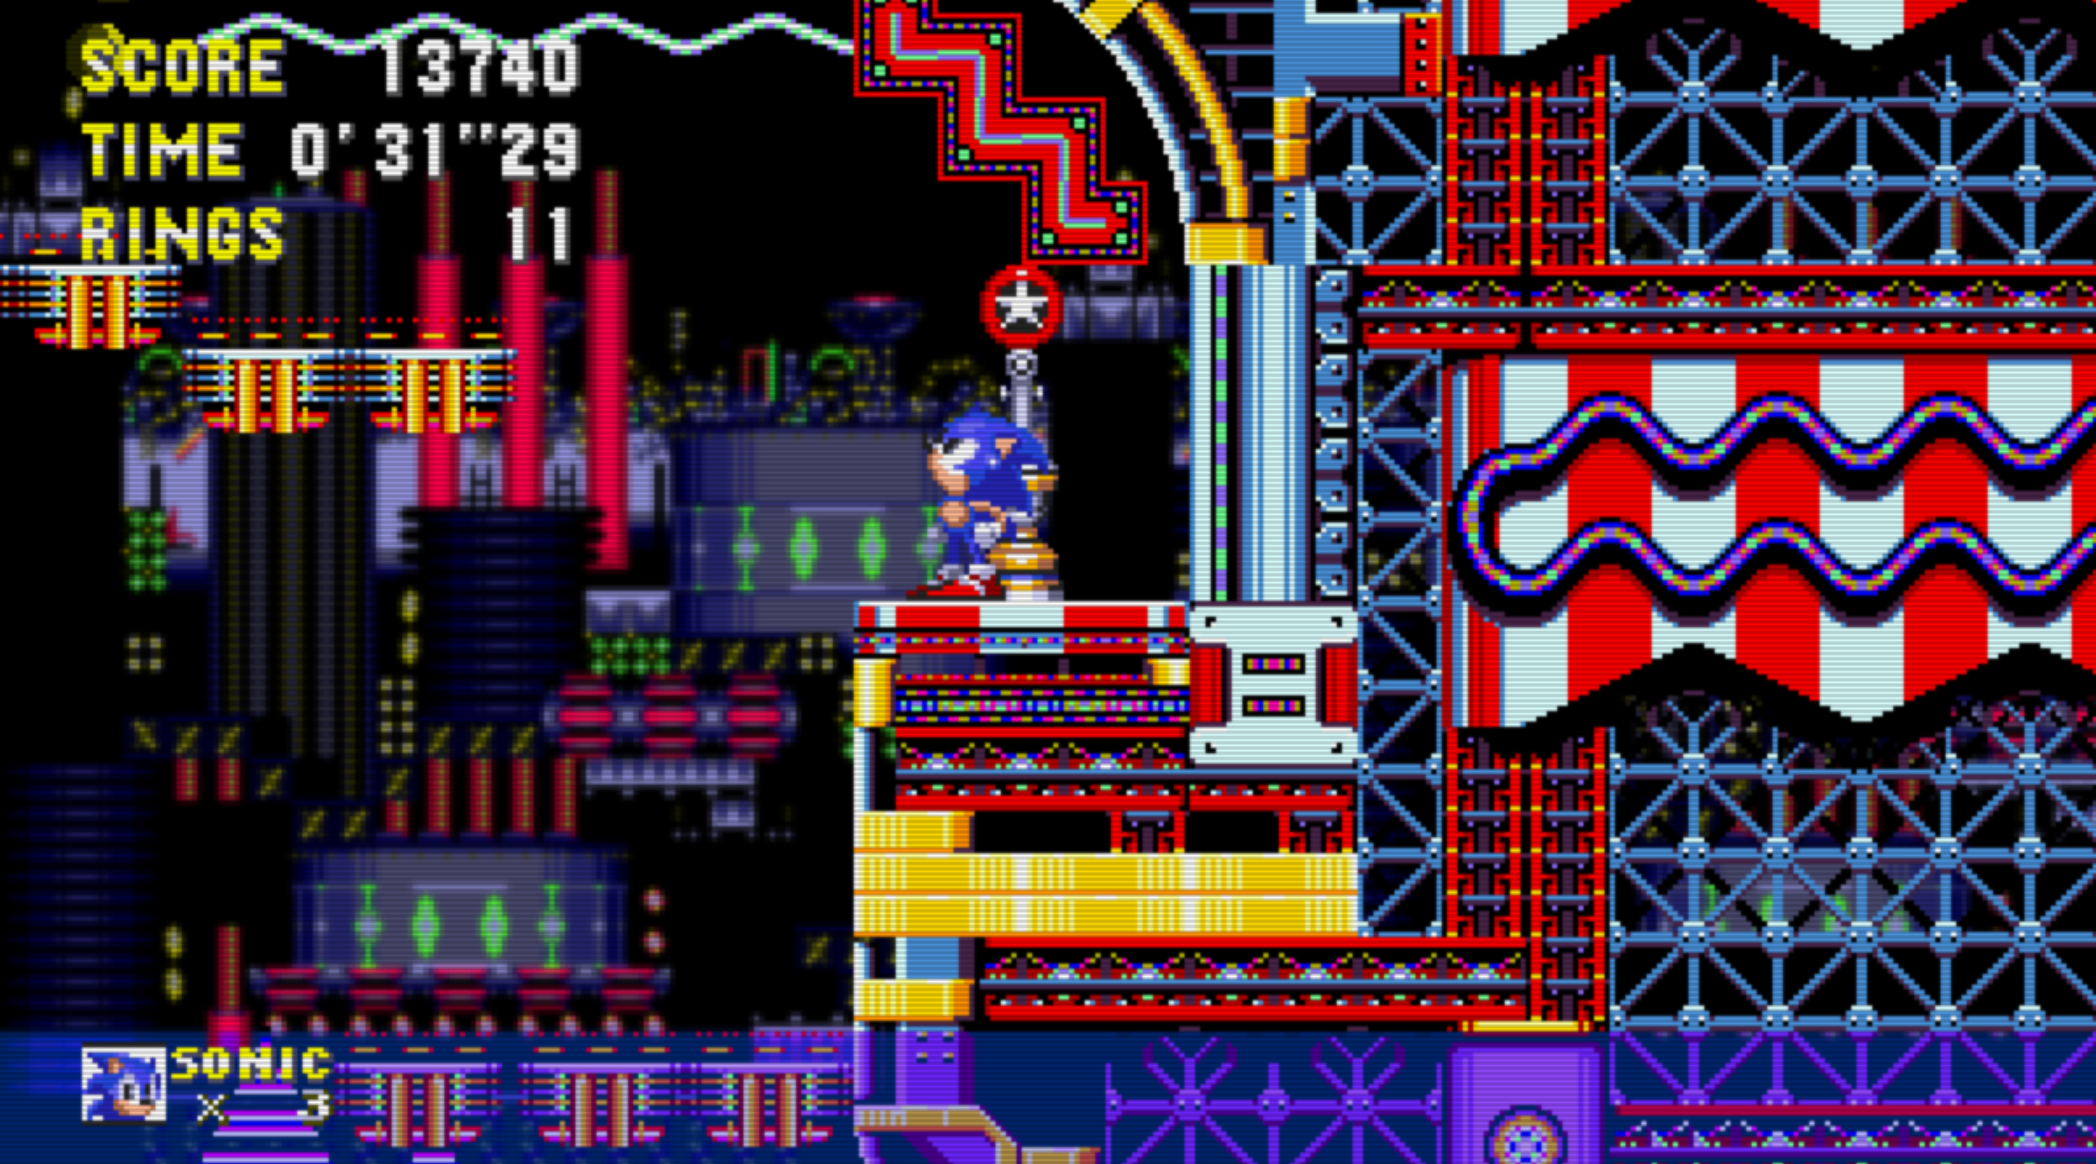 Sonic 3 Air. Sonic 3 Air ROM. Sonic 3 and Knuckles ROM АИР. Sonic 3 Air Android. Sonic 3 mode